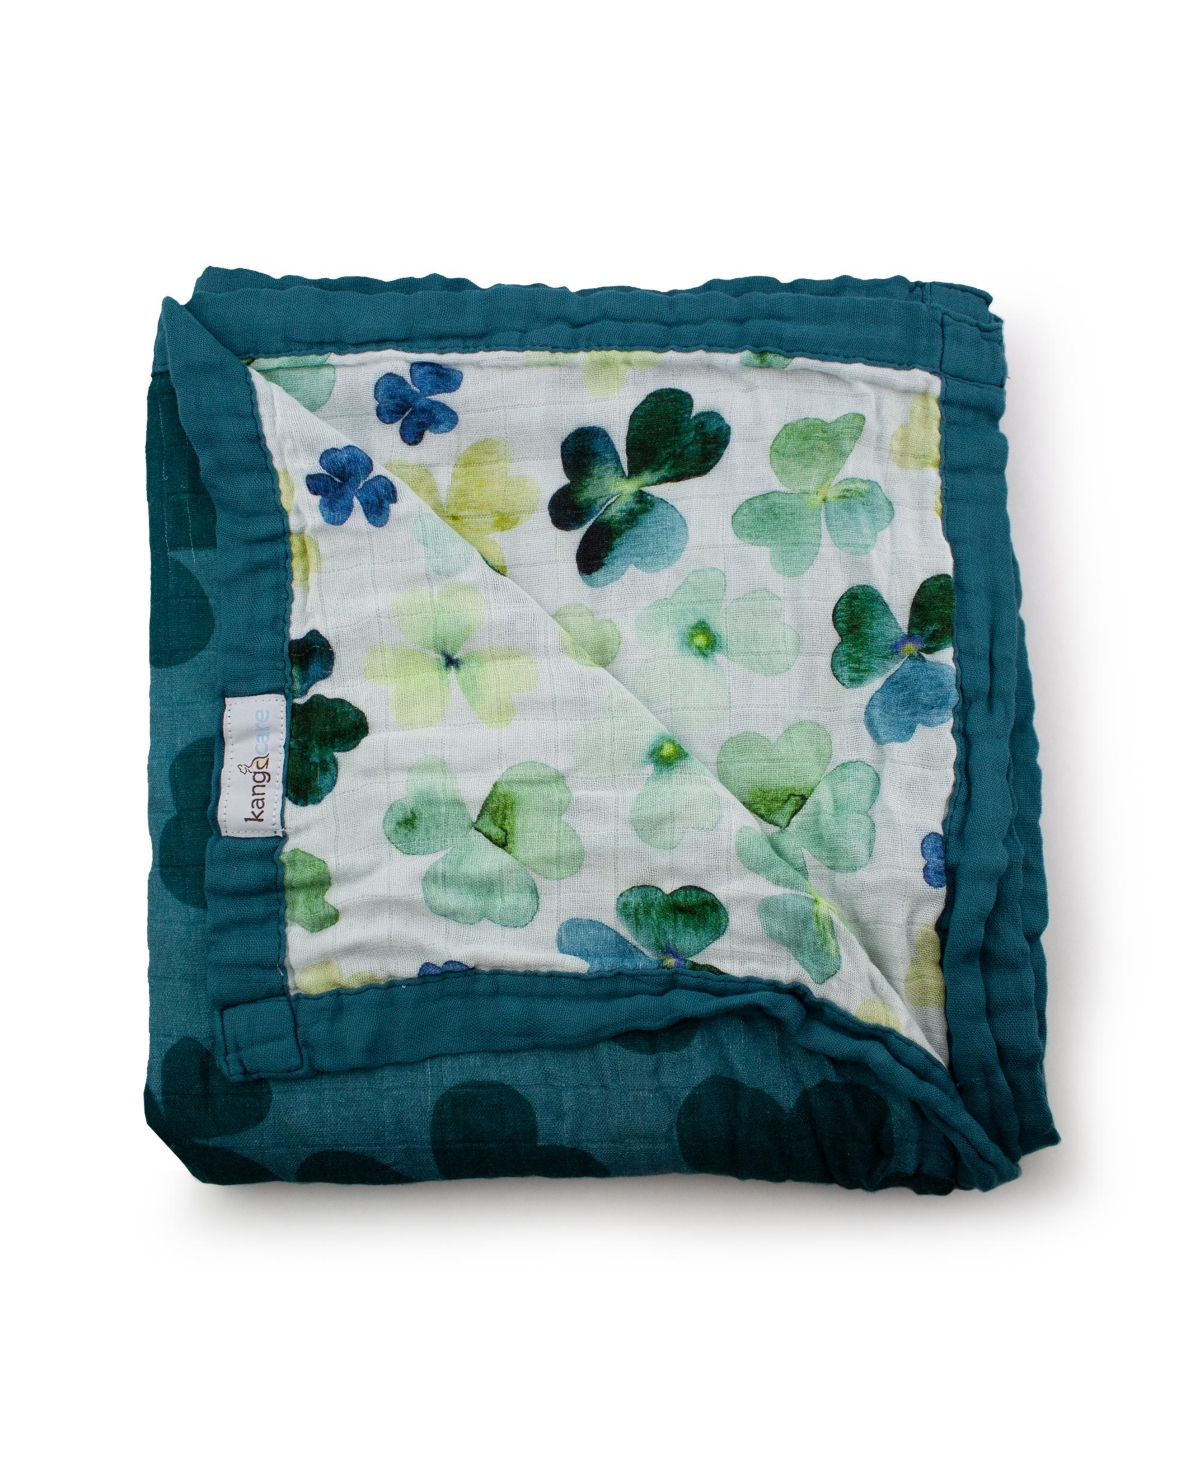 Kanga Care Serene Premium Rayon From Bamboo Muslin Double Layer Reversible Blanket In Clover